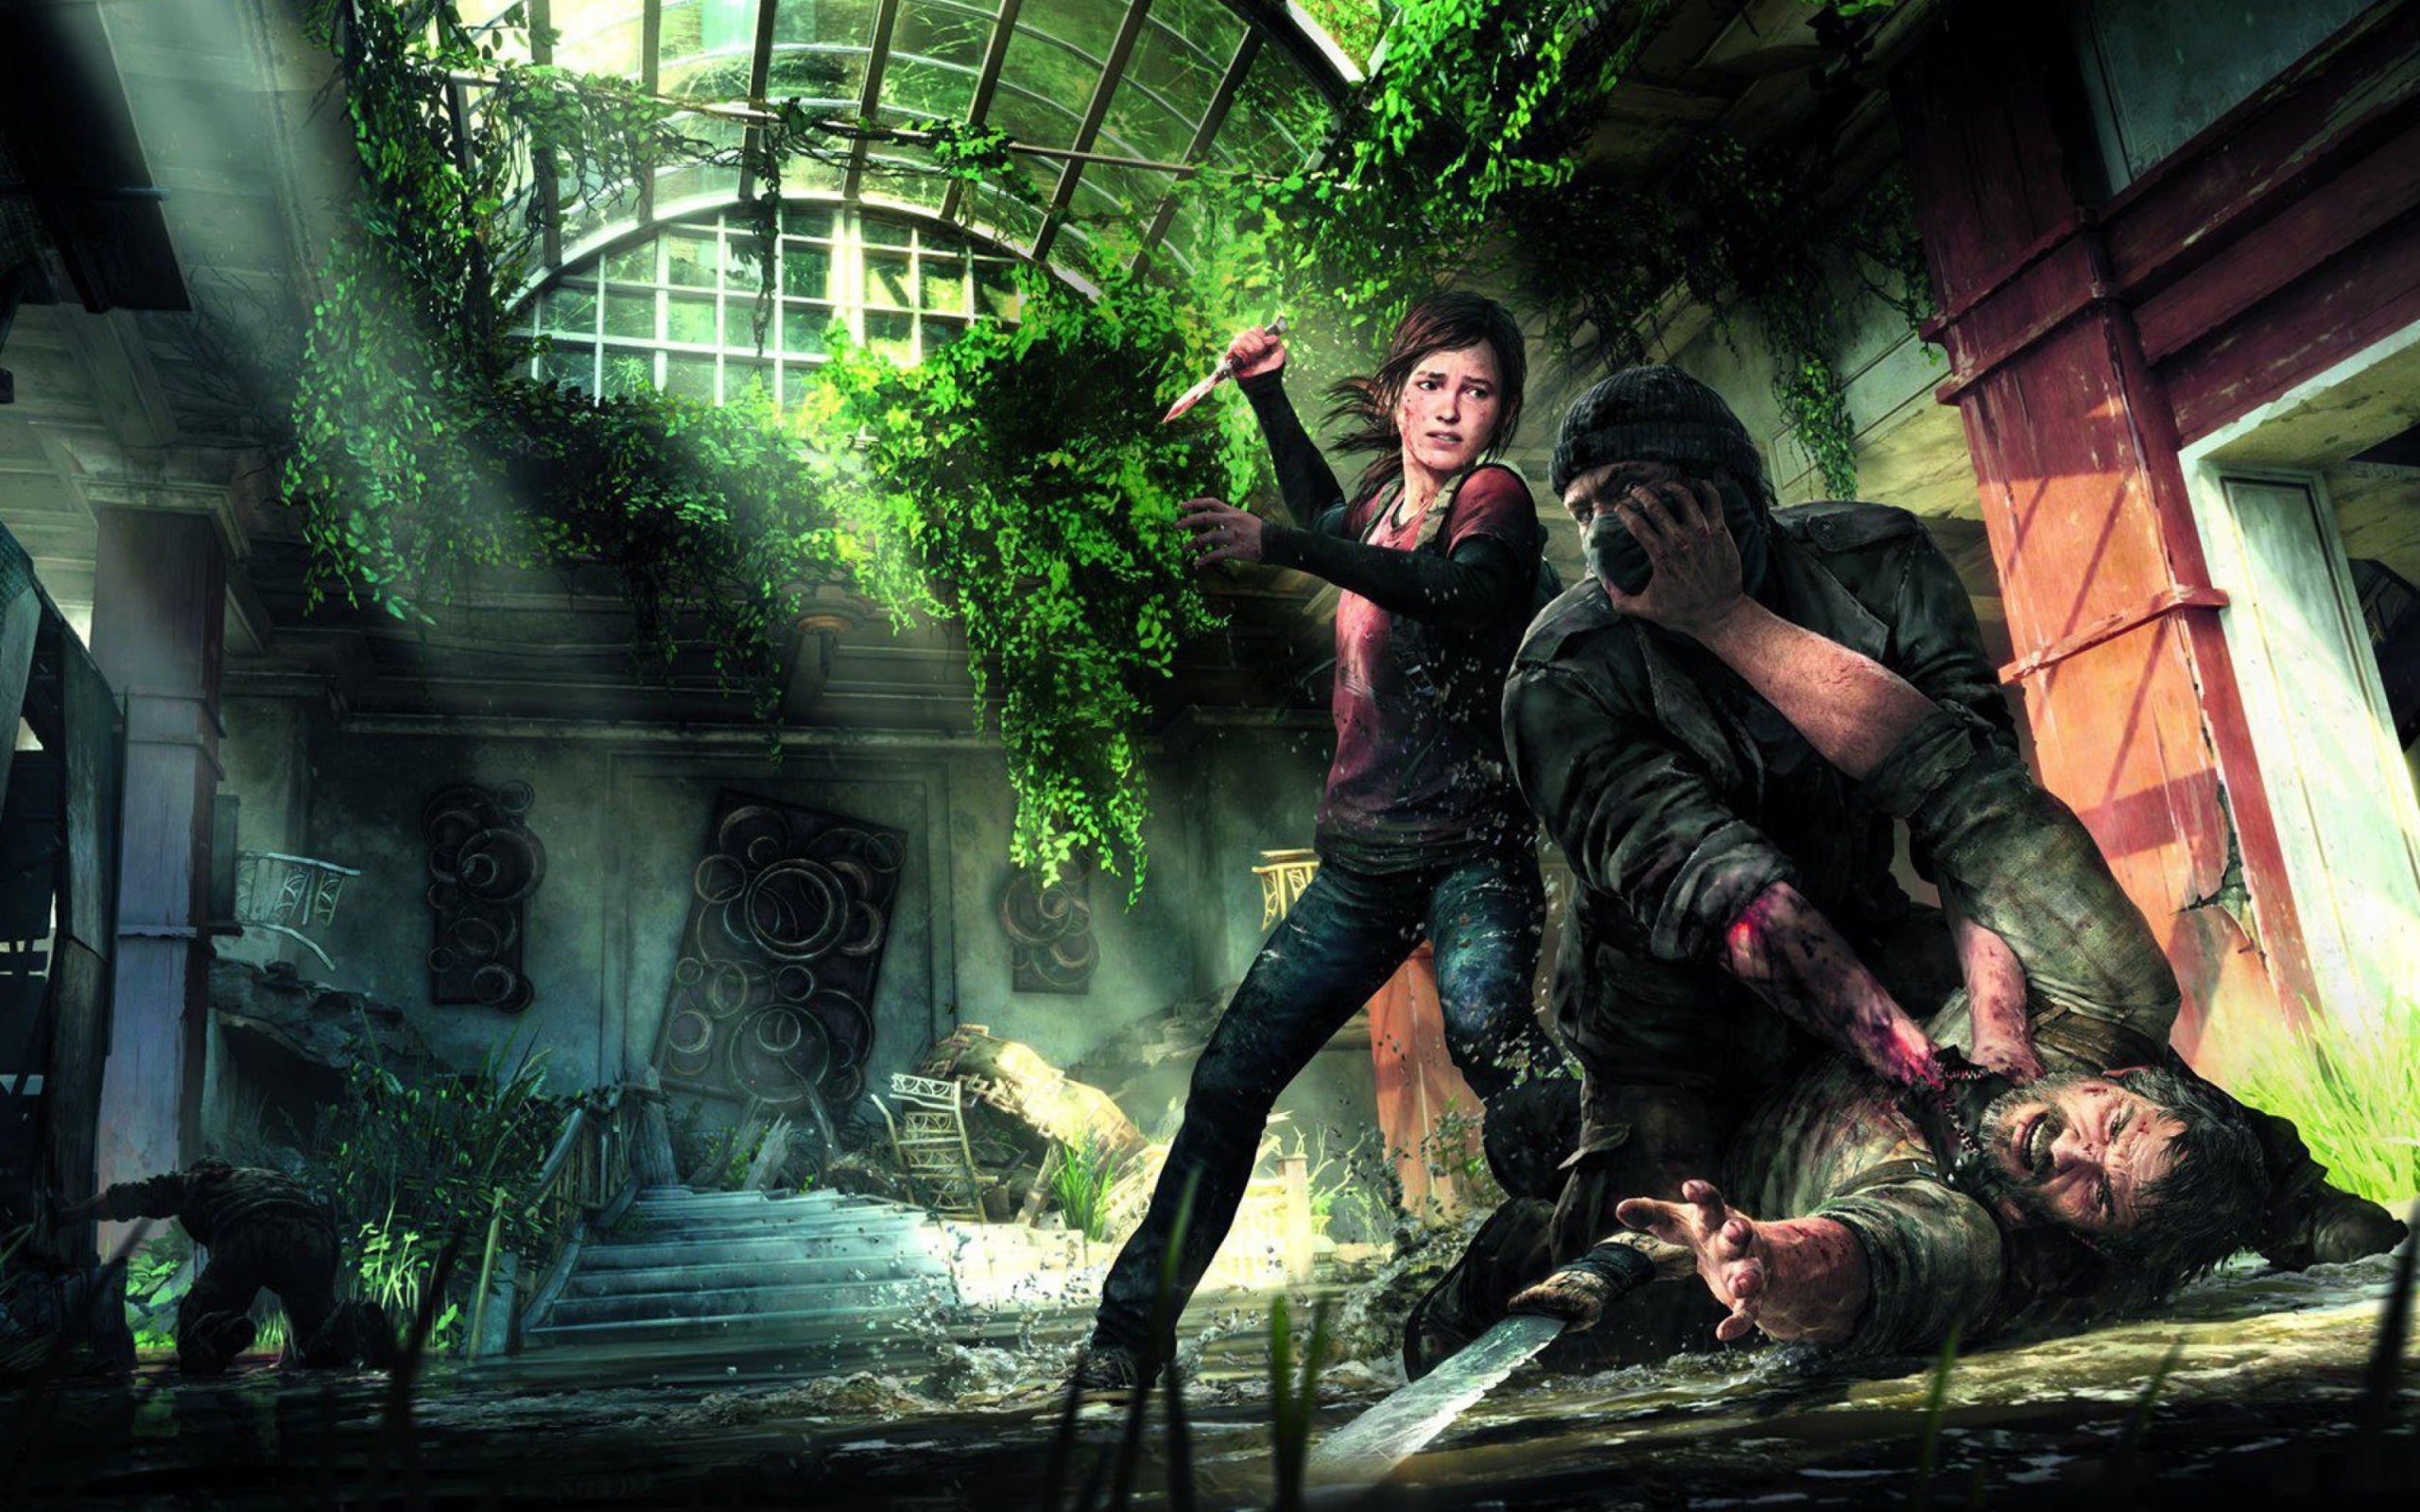 The Last Of Us Naughty Dog for Playstation 3 wallpaper 2560x1600